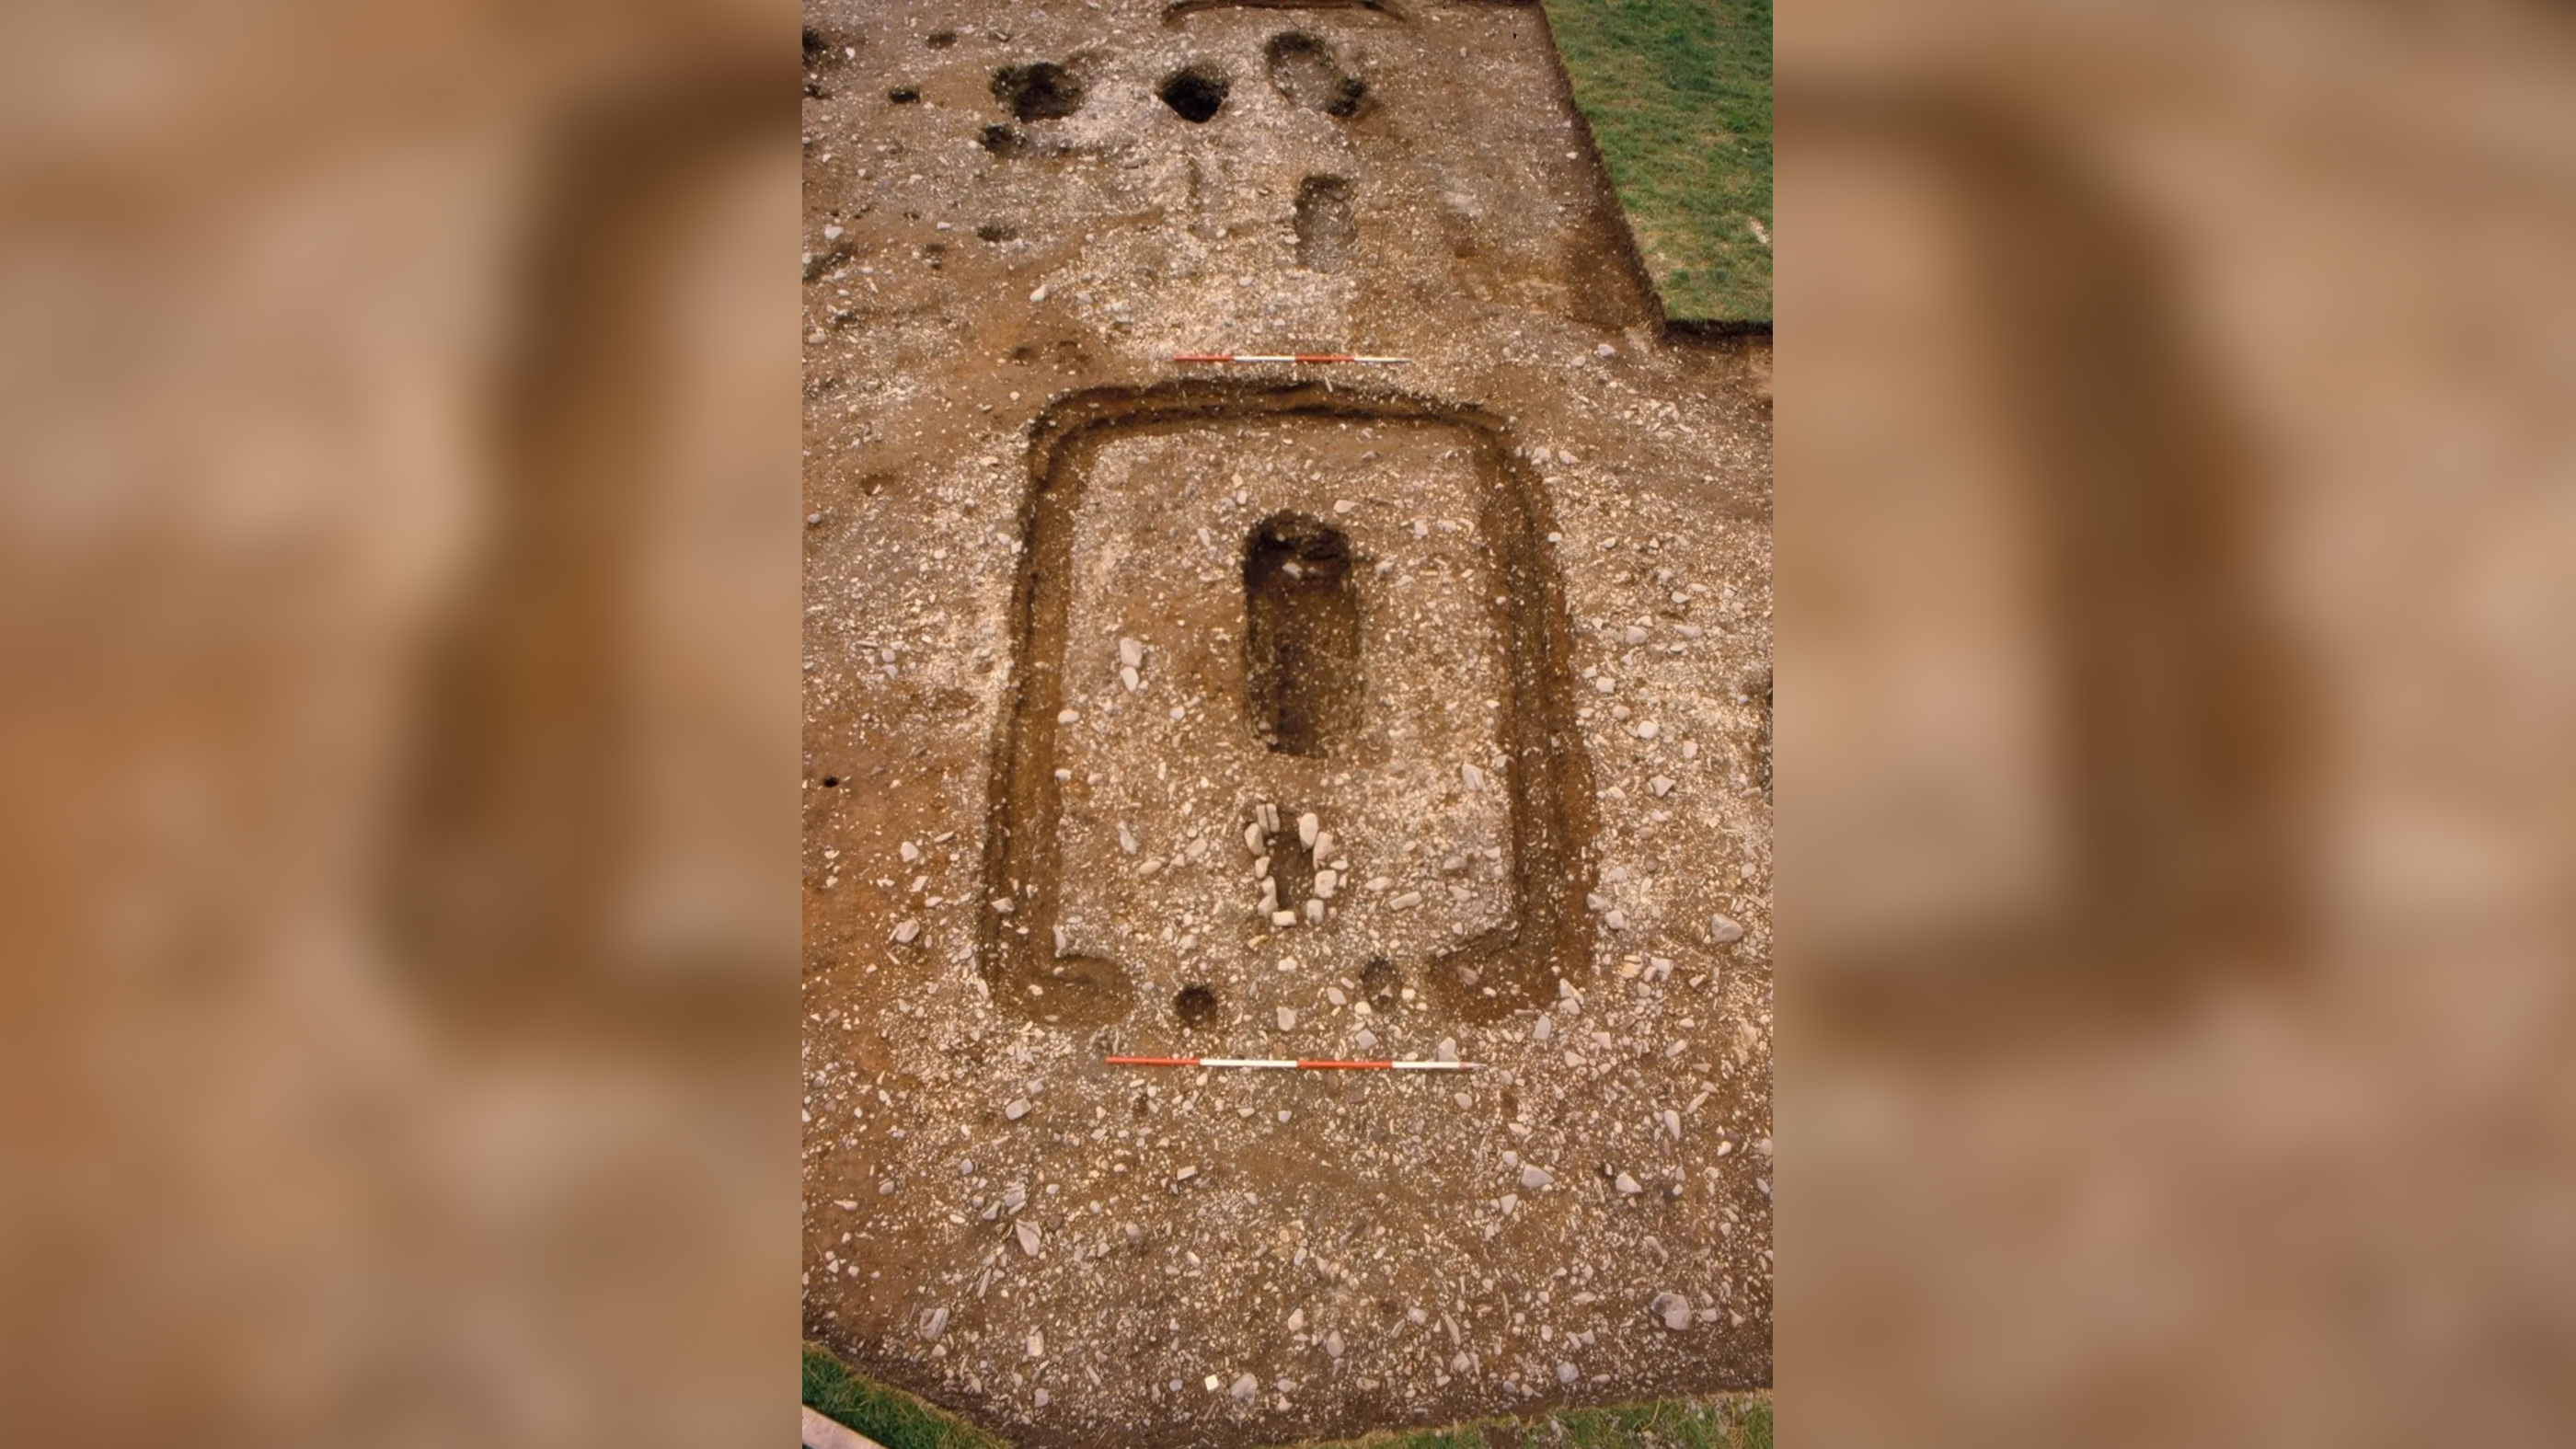 The study suggests the "lost" graves of the post-Roman British royalty are the enclosure graves found at several early Christian burial sites throughout the west of England and Wales.